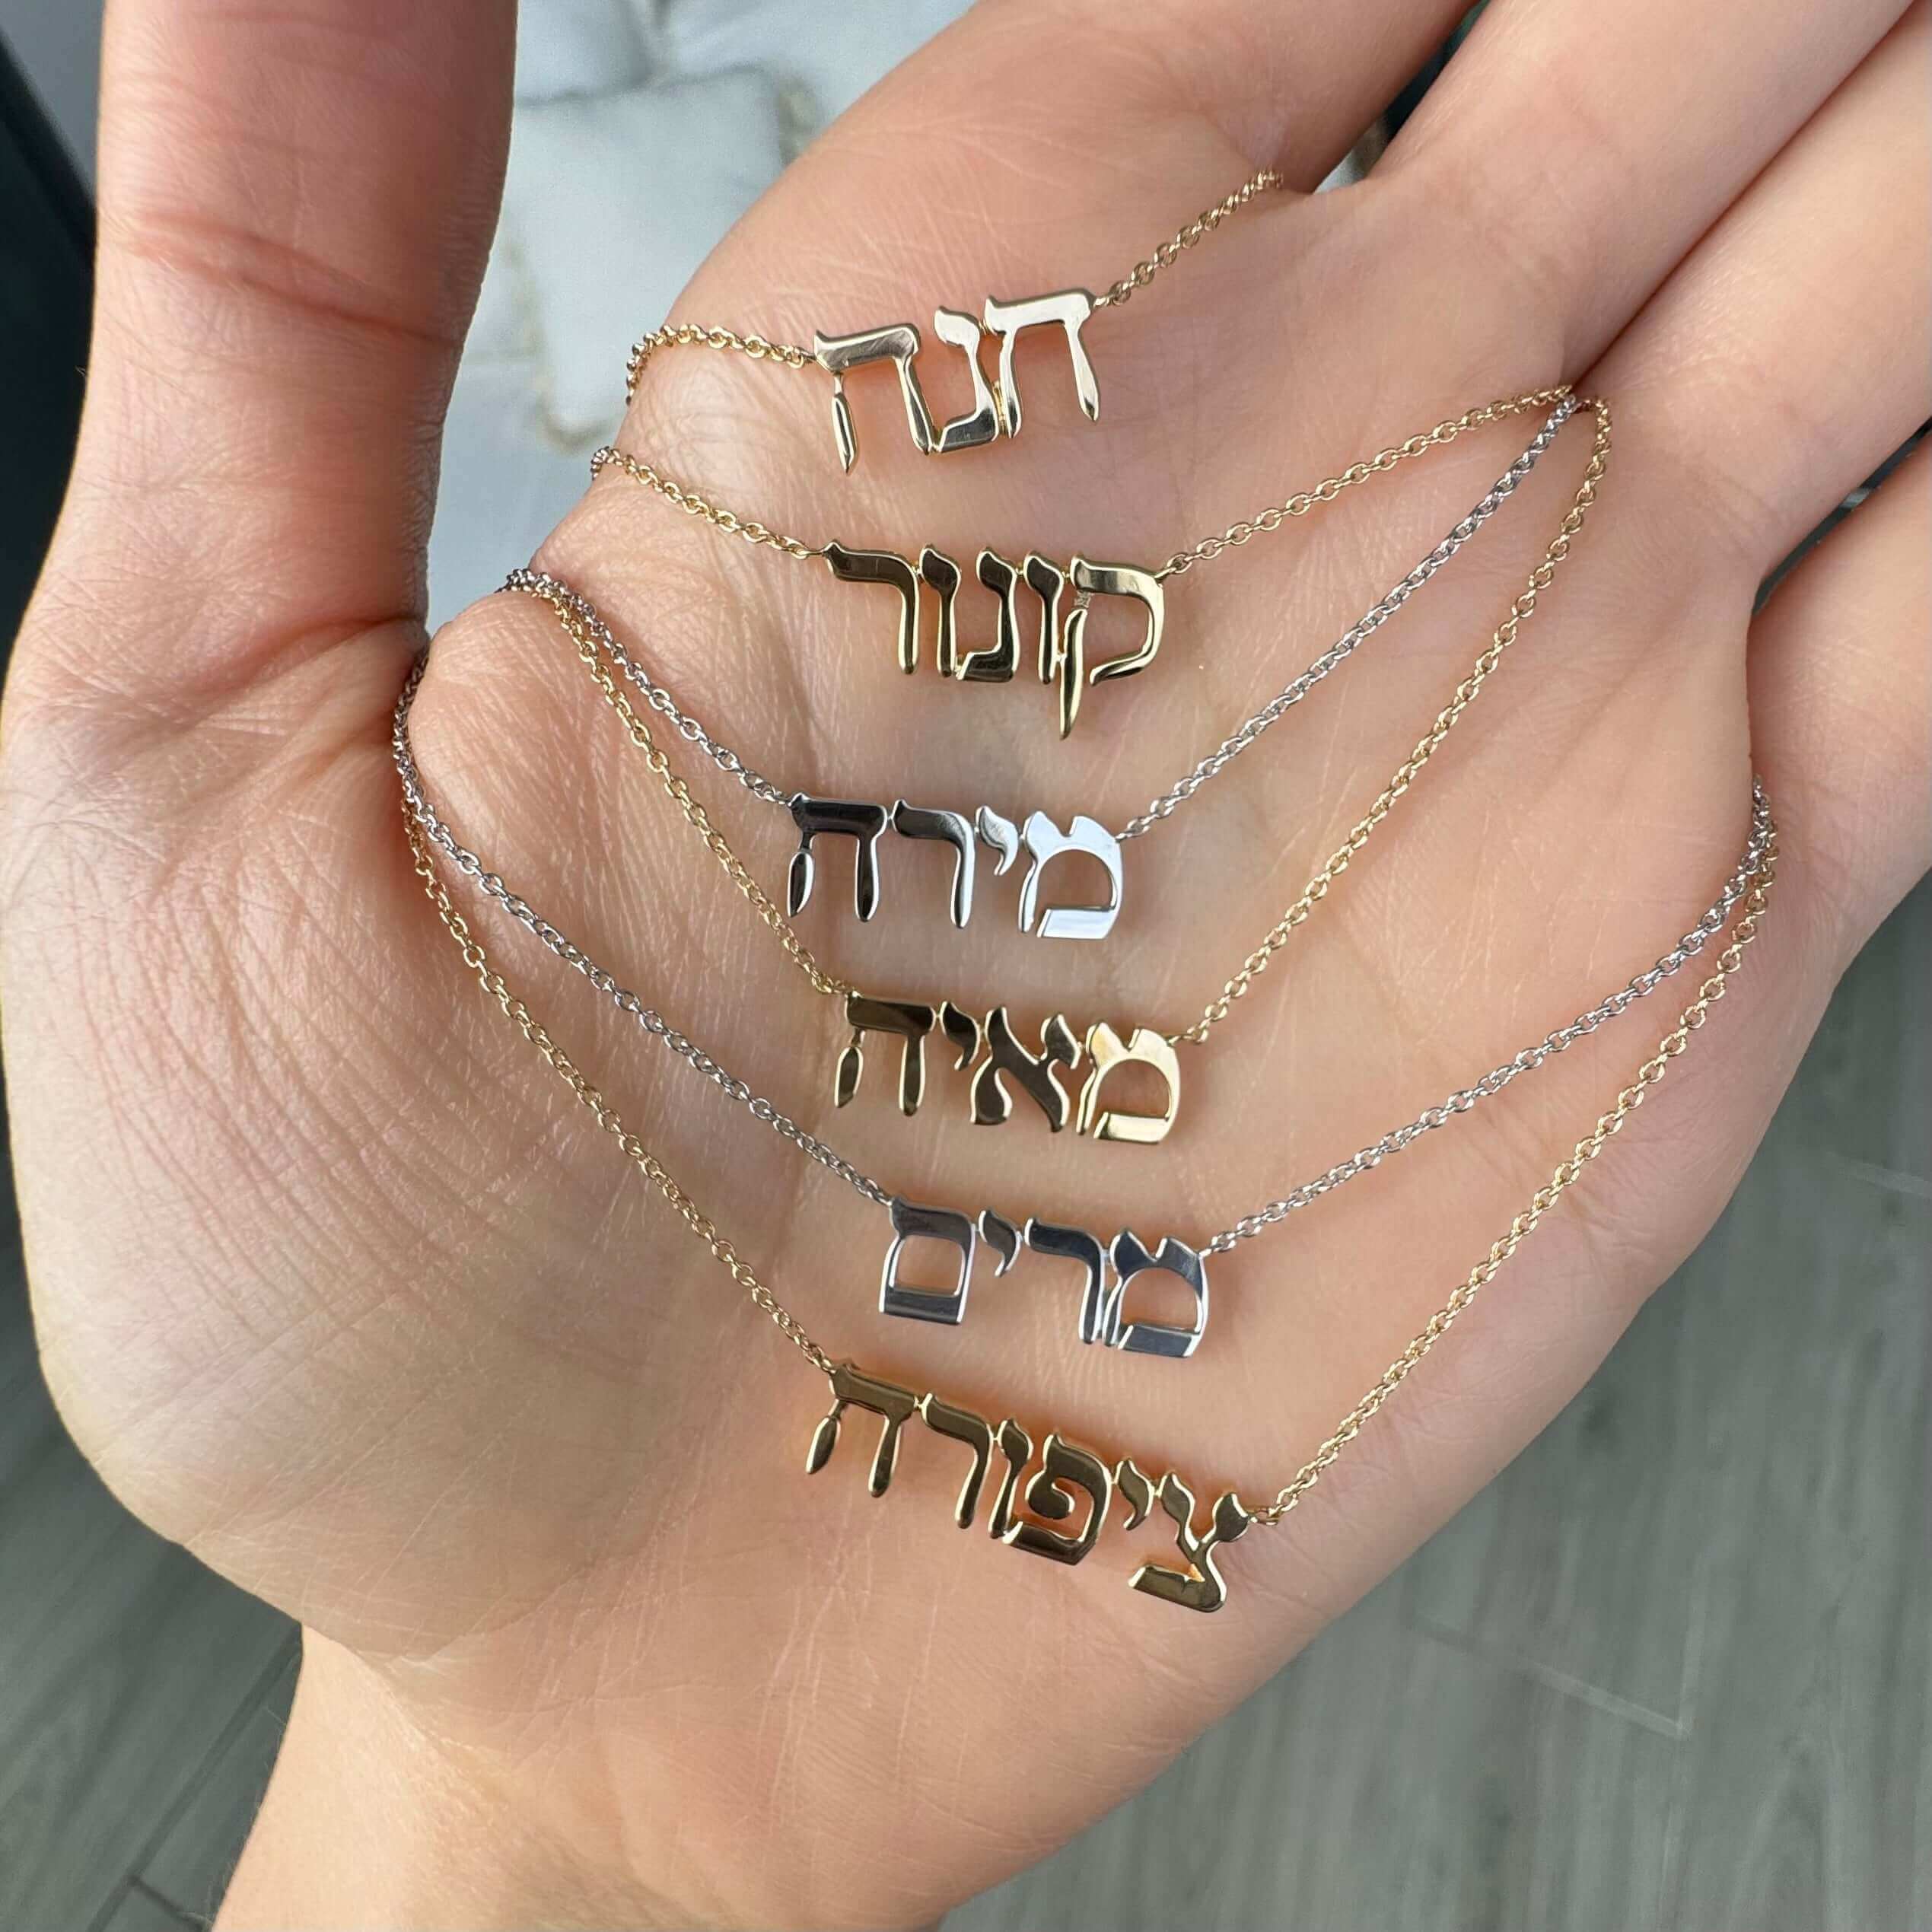 Vanhak Collection - Queeeen Amanda in our custom Hebrew nameplate🙌🏻  Amanda chose yellow gold and 16” length for her necklace. She did “Noah” in  heberew 💙 🫶🏻💙@notskinnybutnotfat . . . . . . . . . . . . #